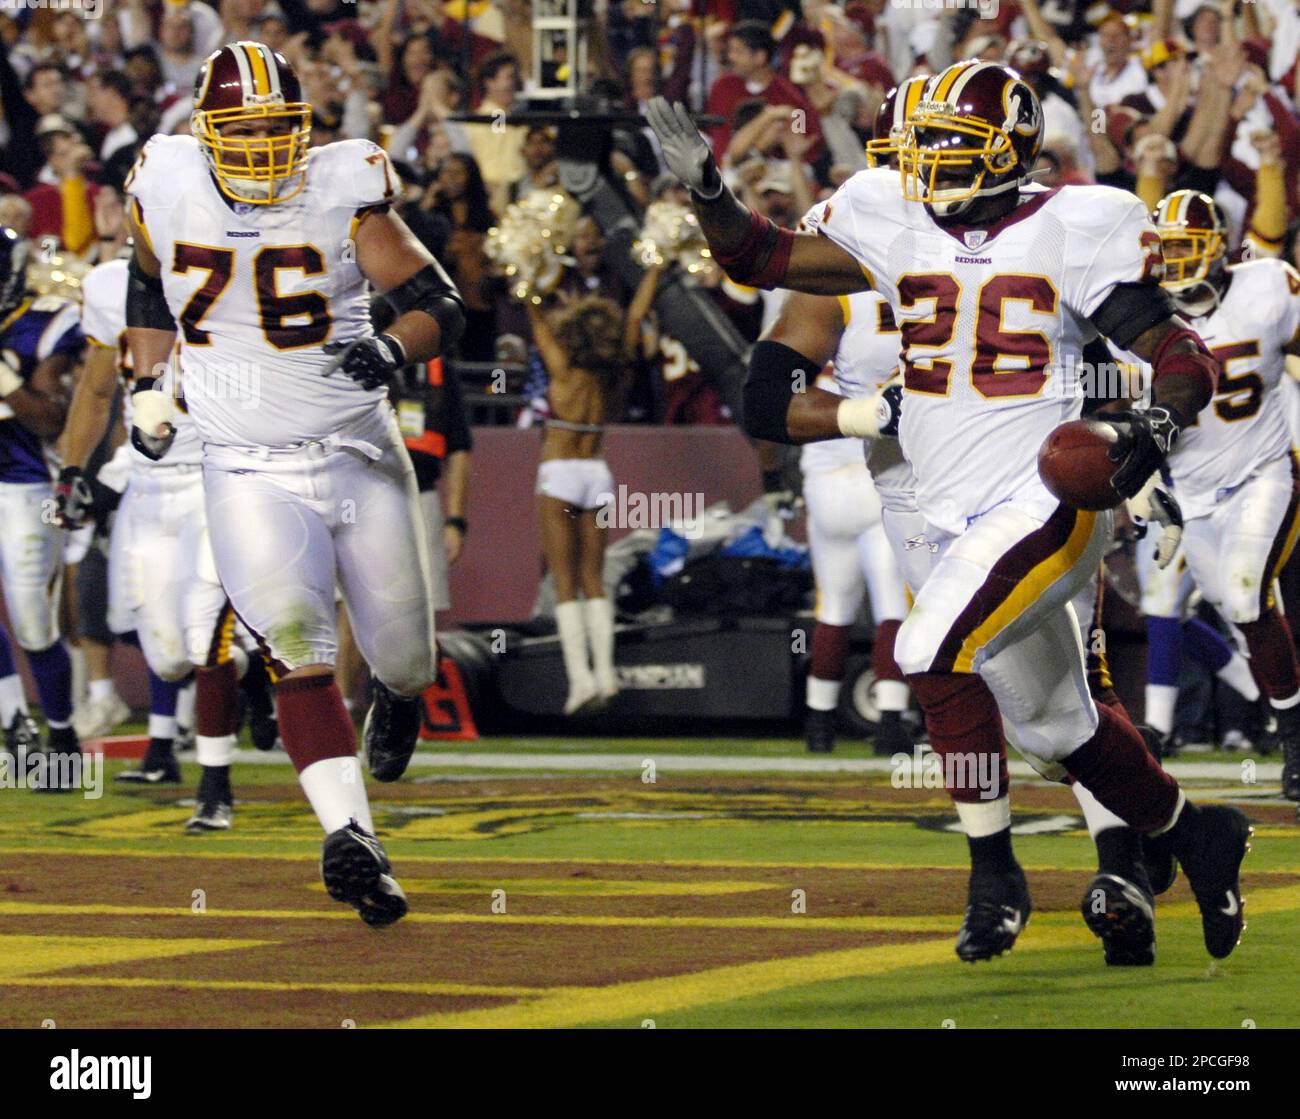 FILE ** Washington Redskins offensive tackle Jon Jansen (76), left, follows  running back Clinton Portis (26) after Portis scored a touchdown against  the Minnesota Vikings in Landover, Md. in this Sept.